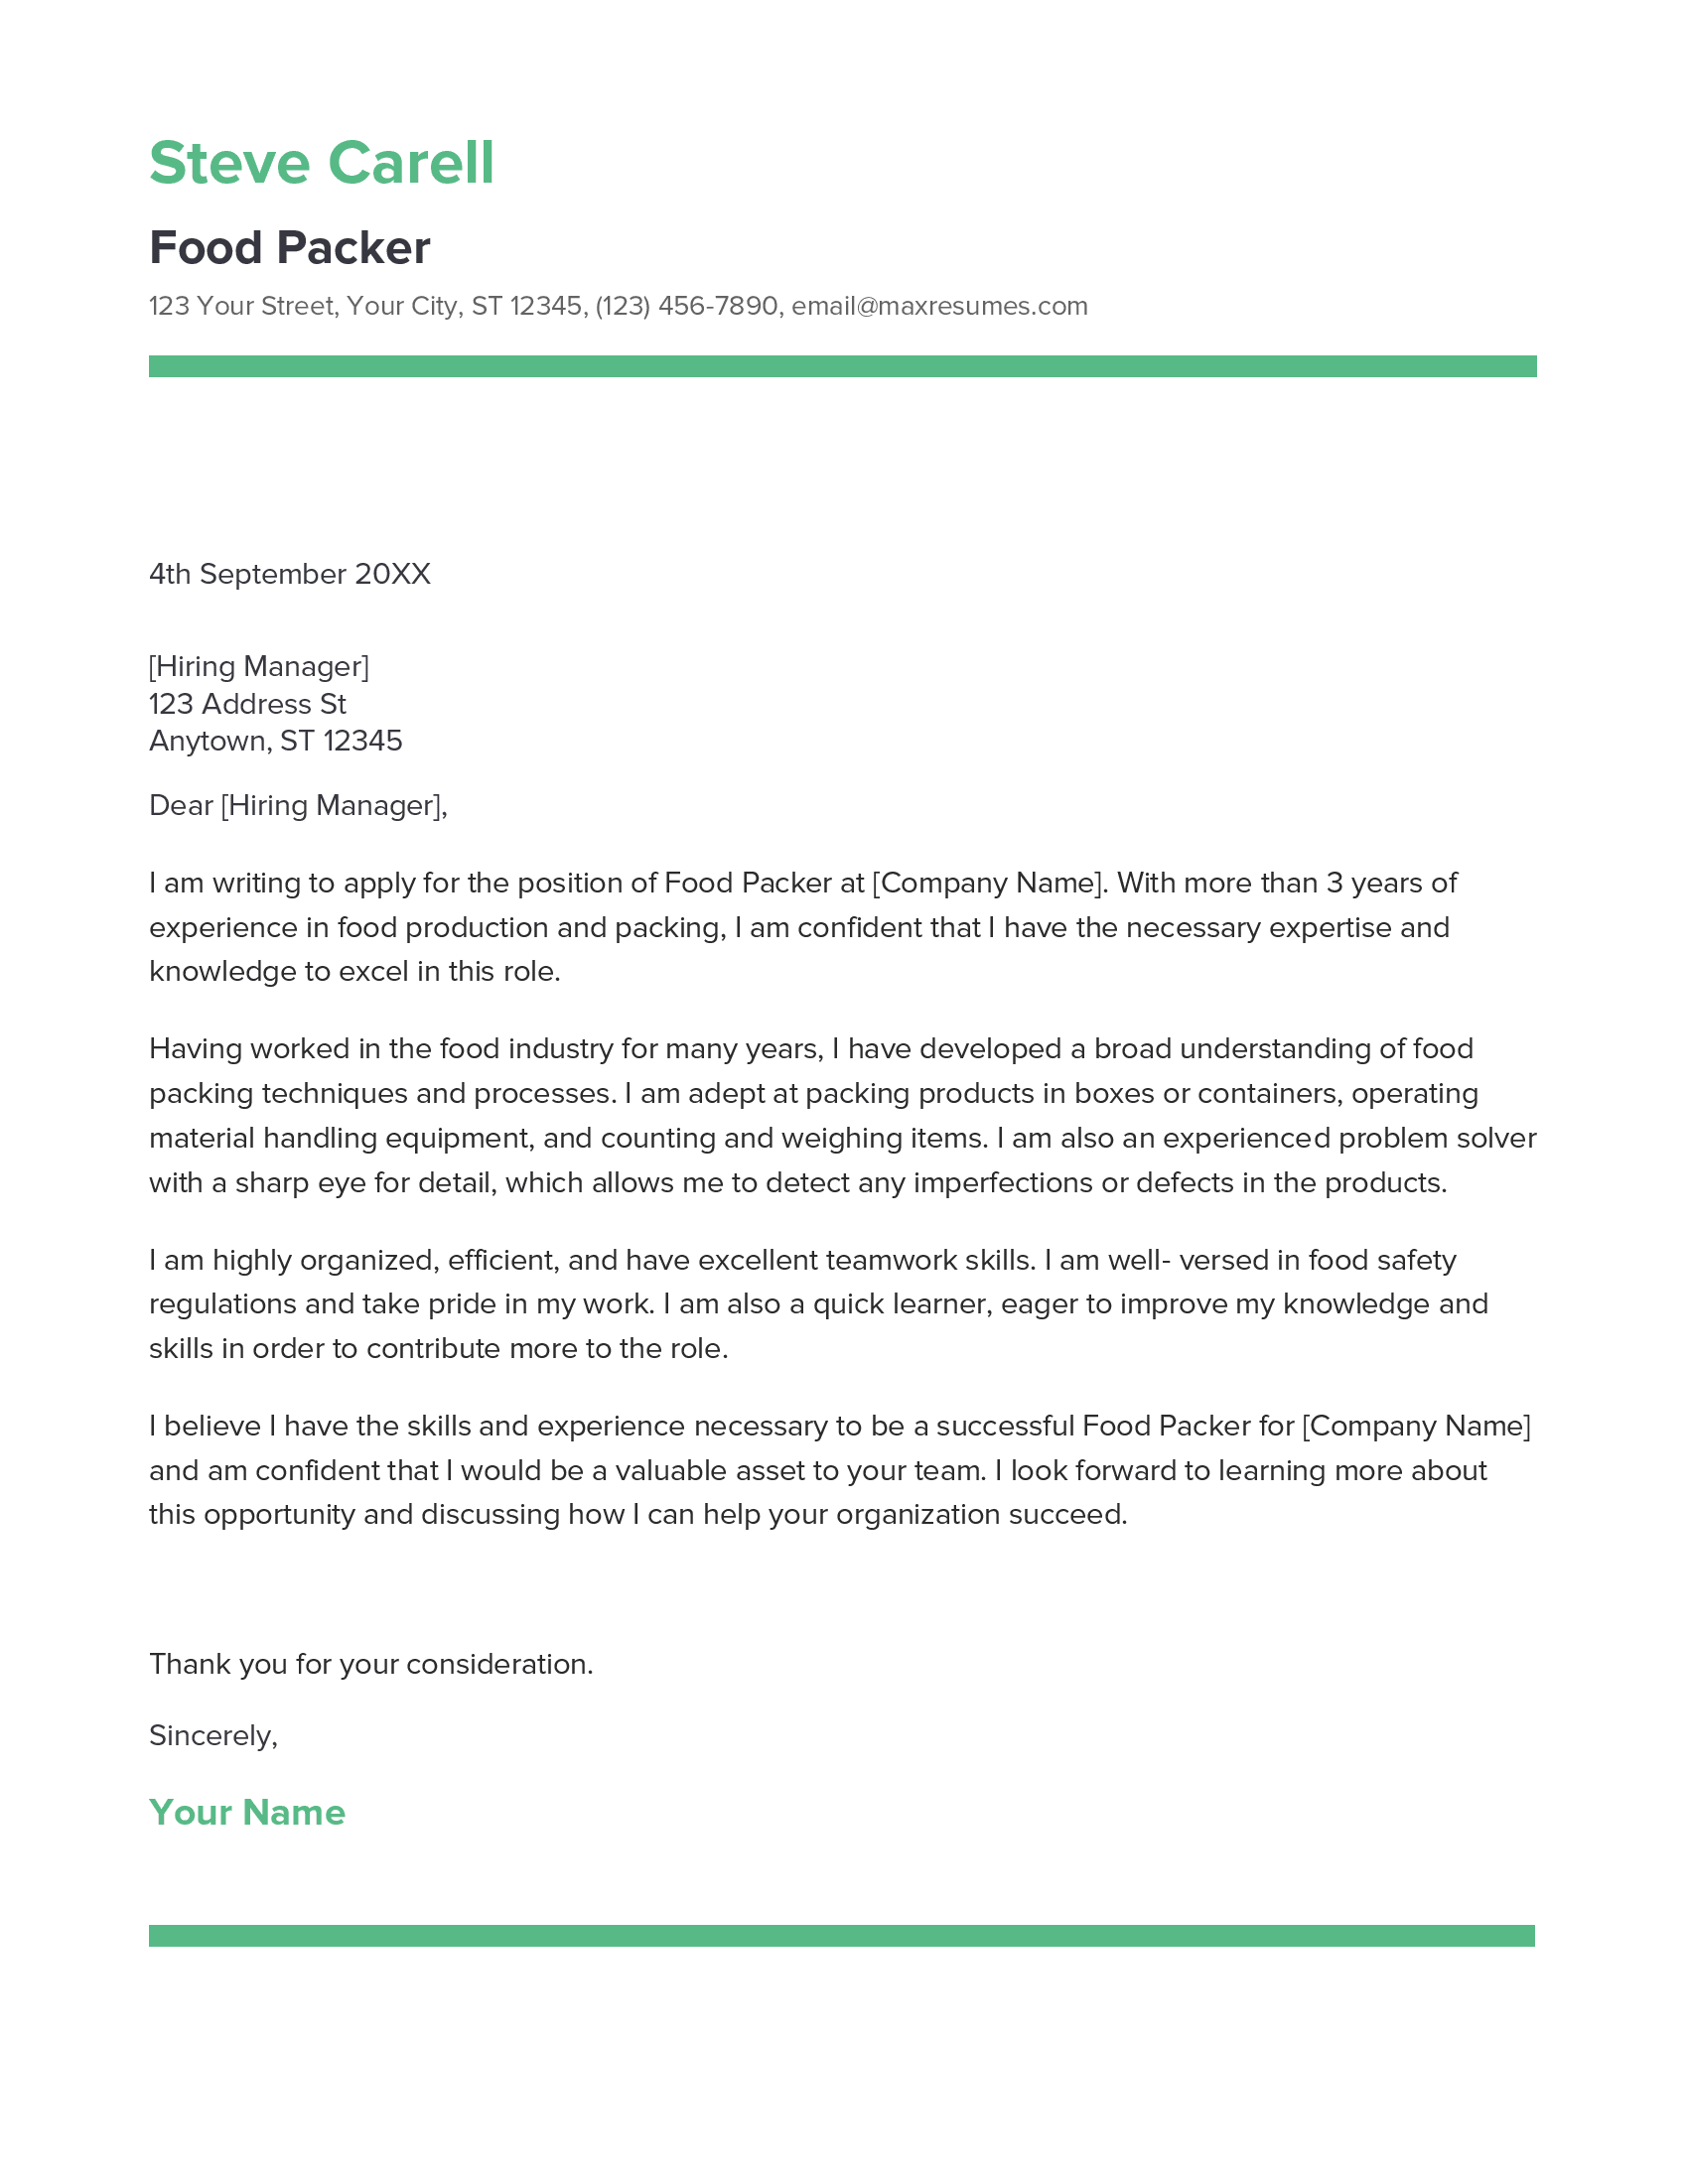 Food Packer Cover Letter Example